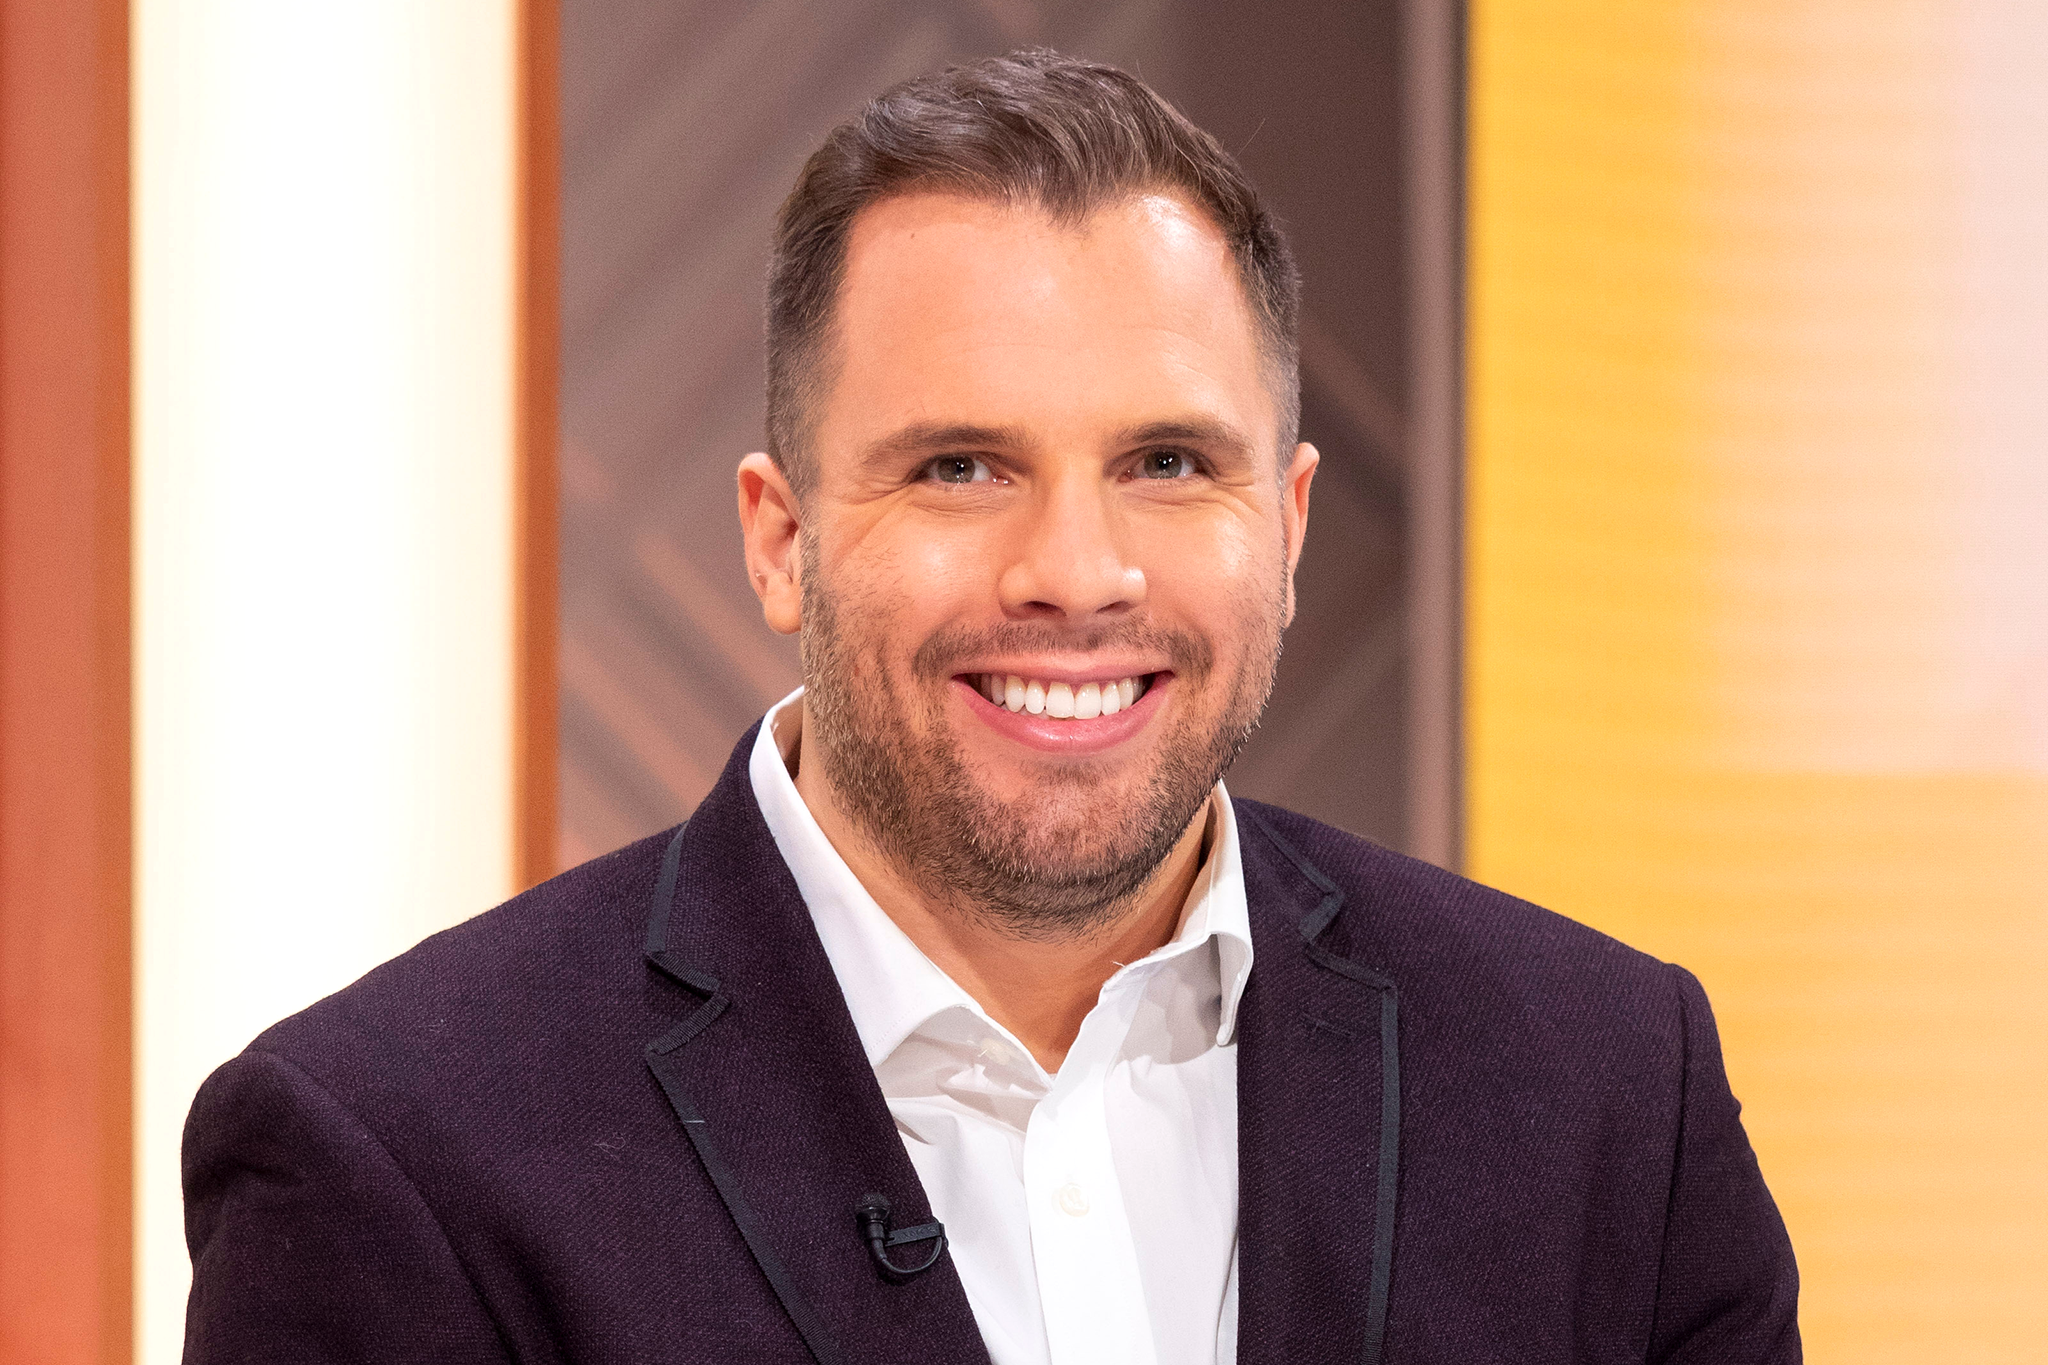 Former GB News presenter Dan Wootton has published a personal list of the top 50 “worst people in the UK”